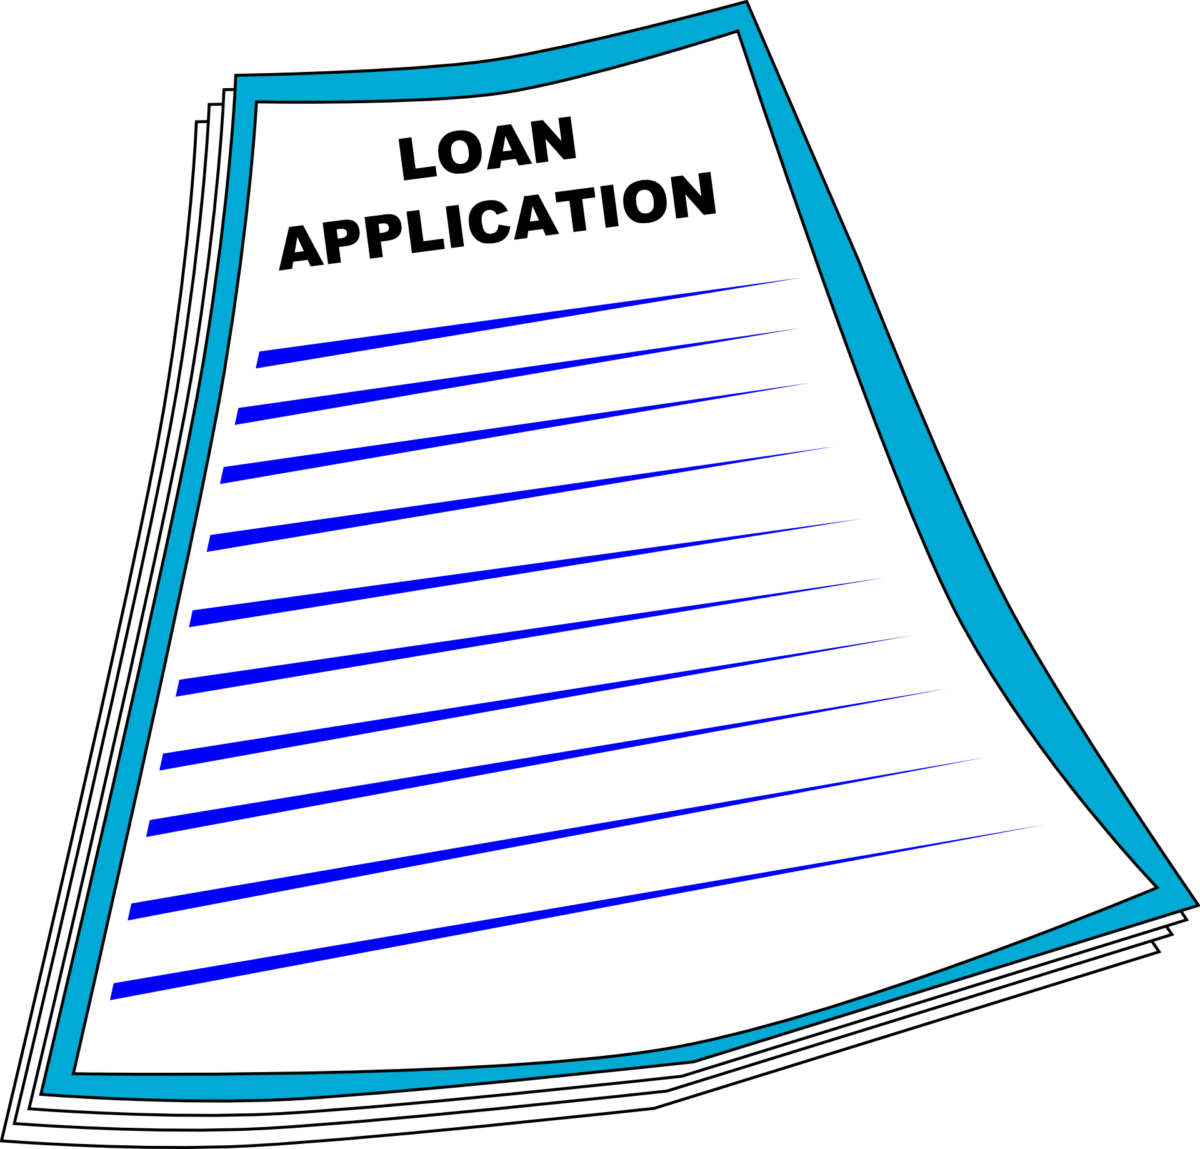 What Is A Conventional Home Loan?